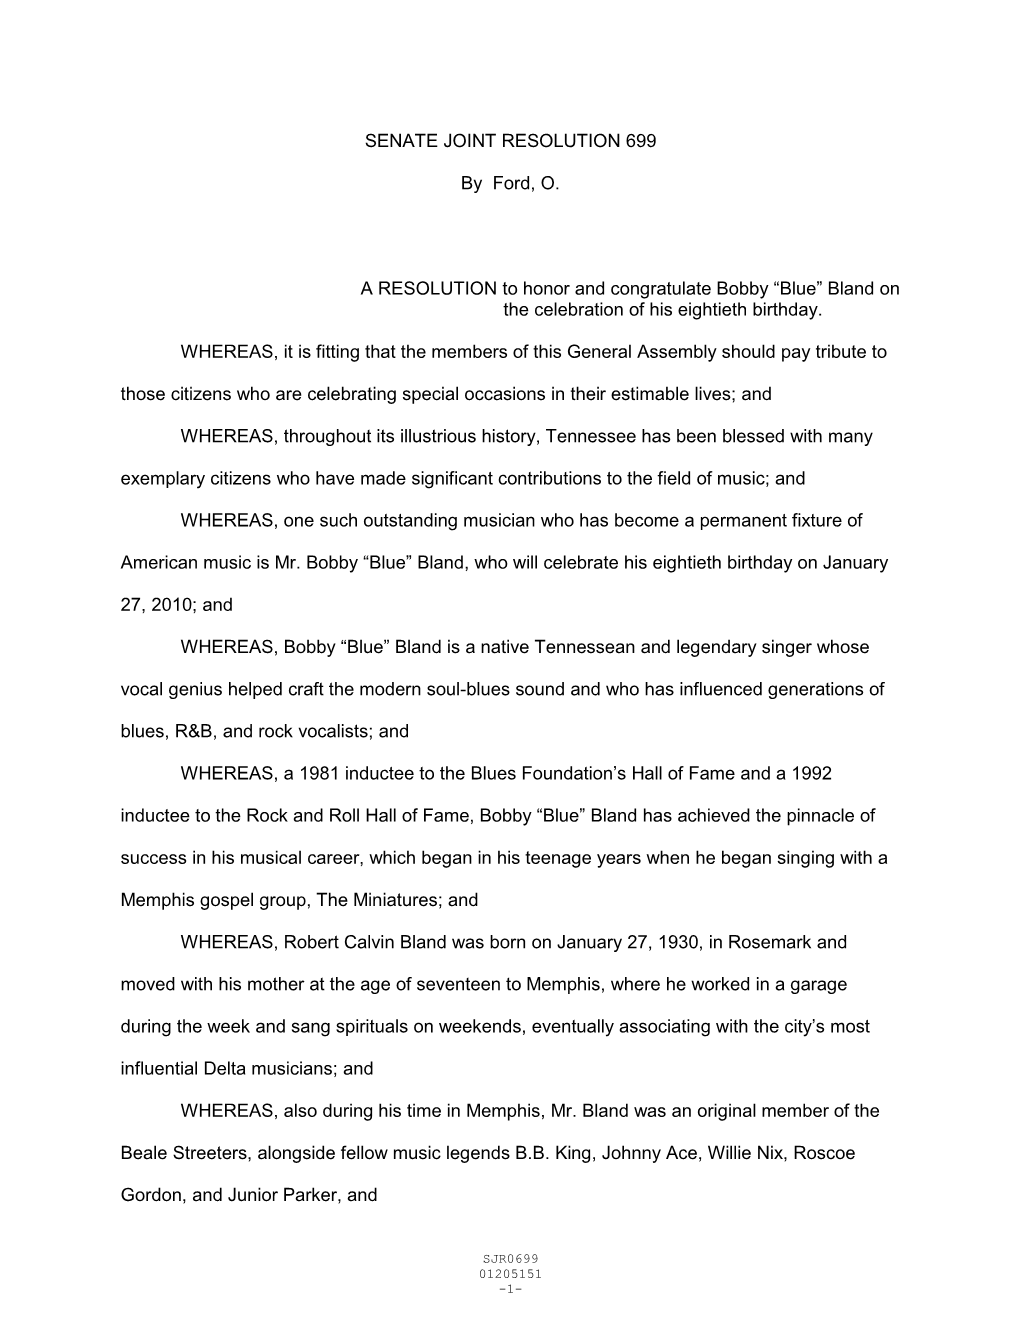 SENATE JOINT RESOLUTION 699 by Ford, O. a RESOLUTION To